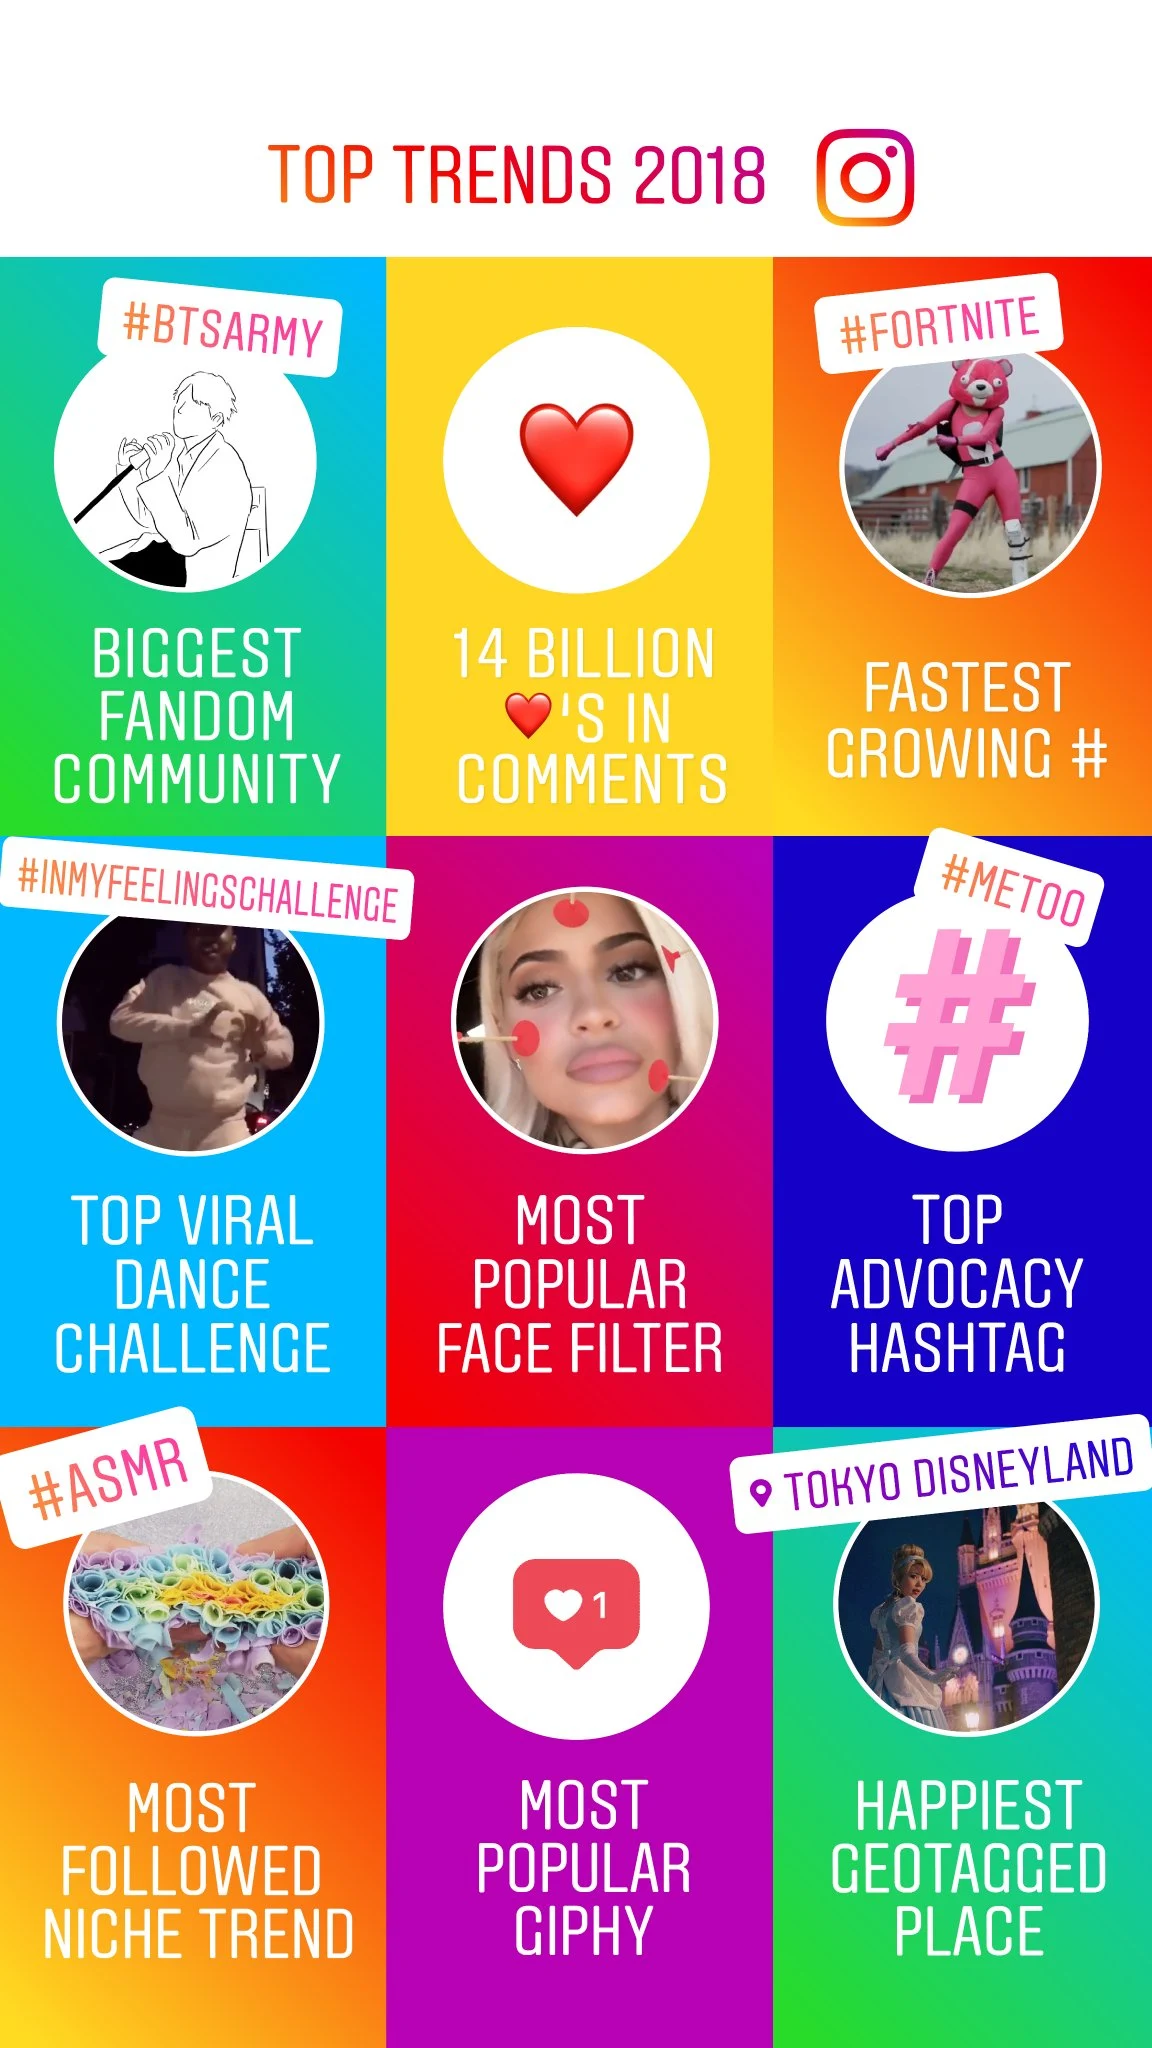 Fortnite, K-pop, and bright red hearts: What ruled Instagram in 2018 - infographic